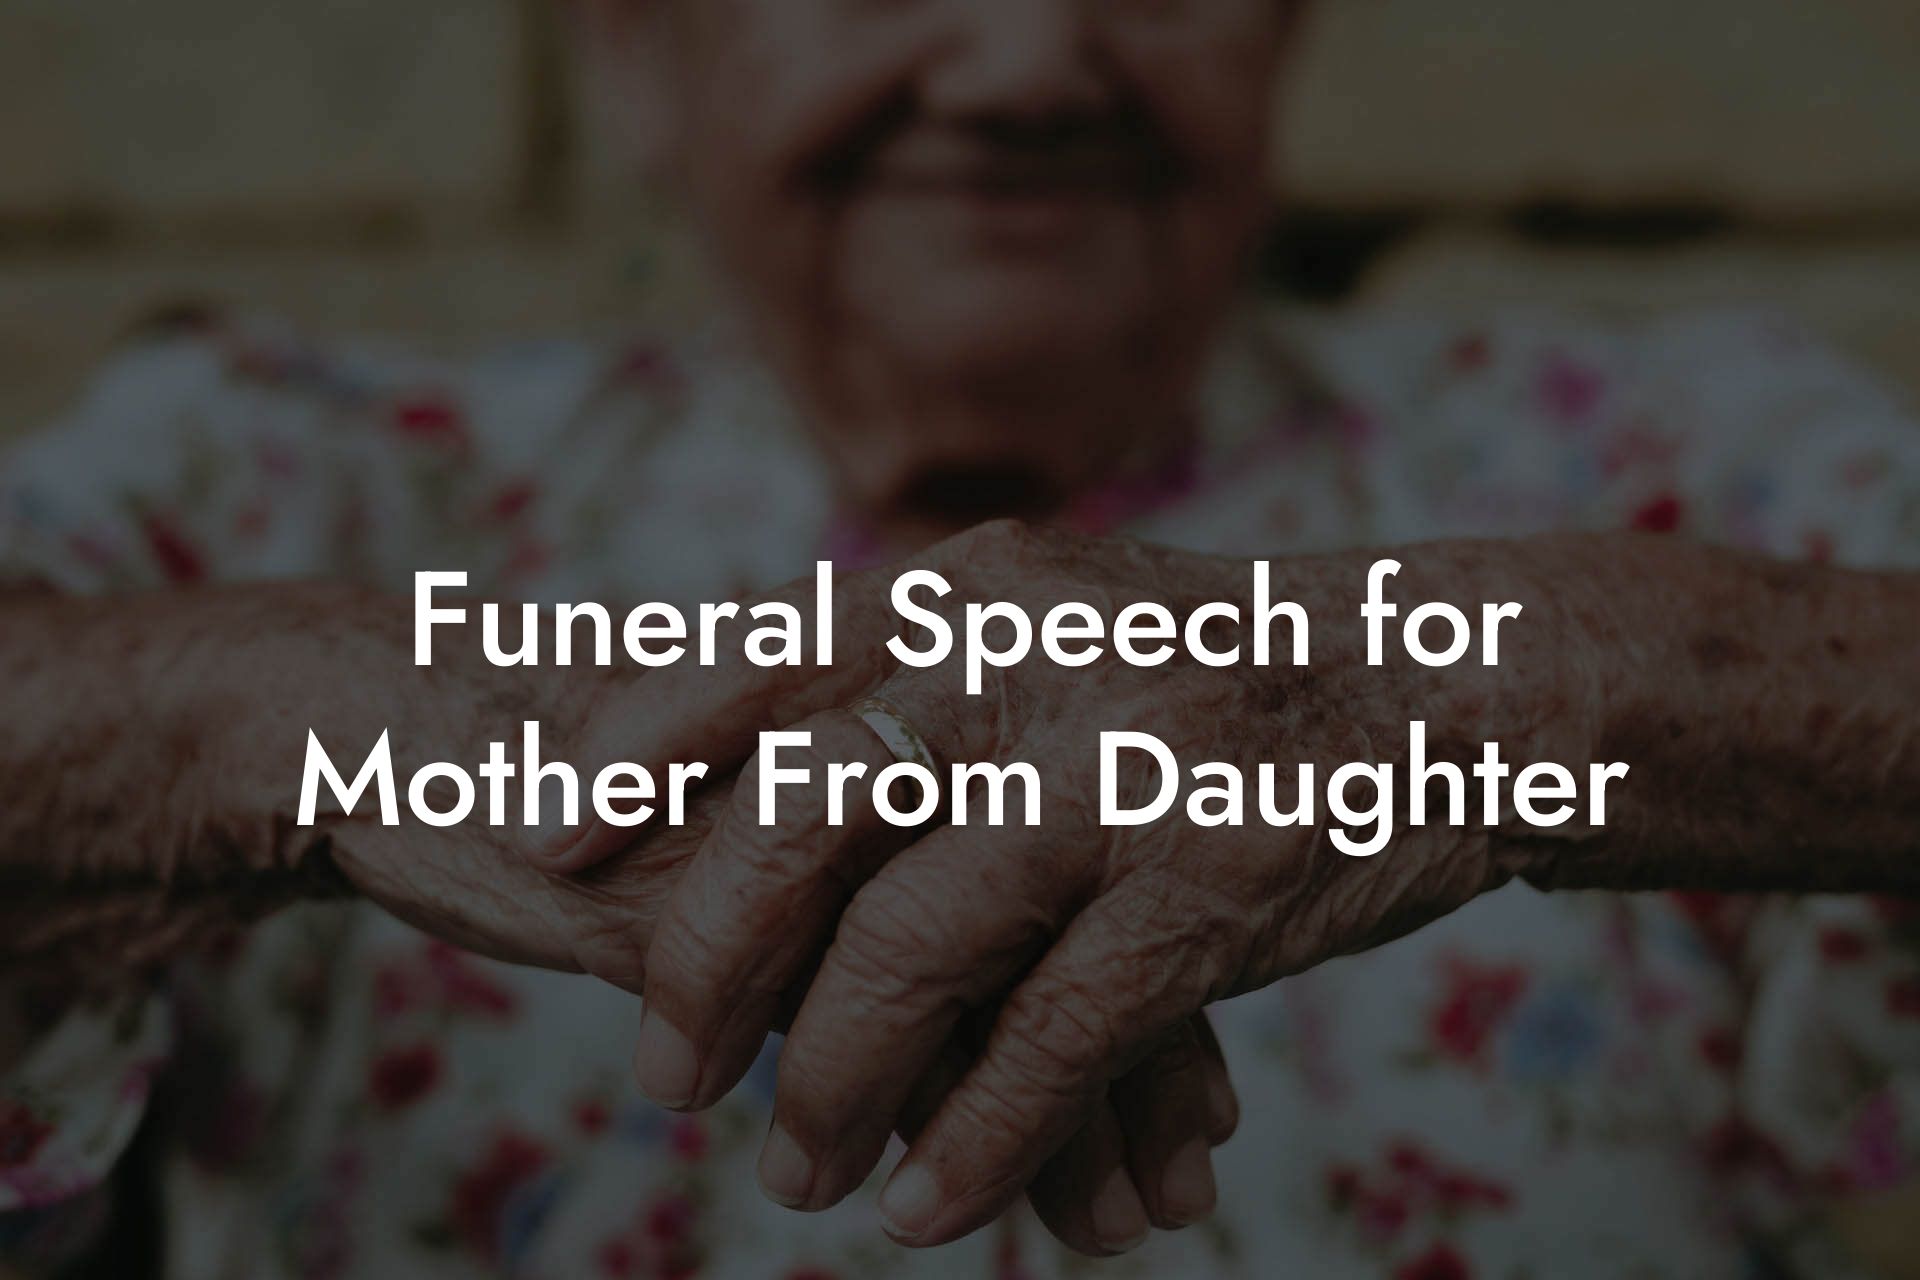 Funeral Speech for Mother From Daughter